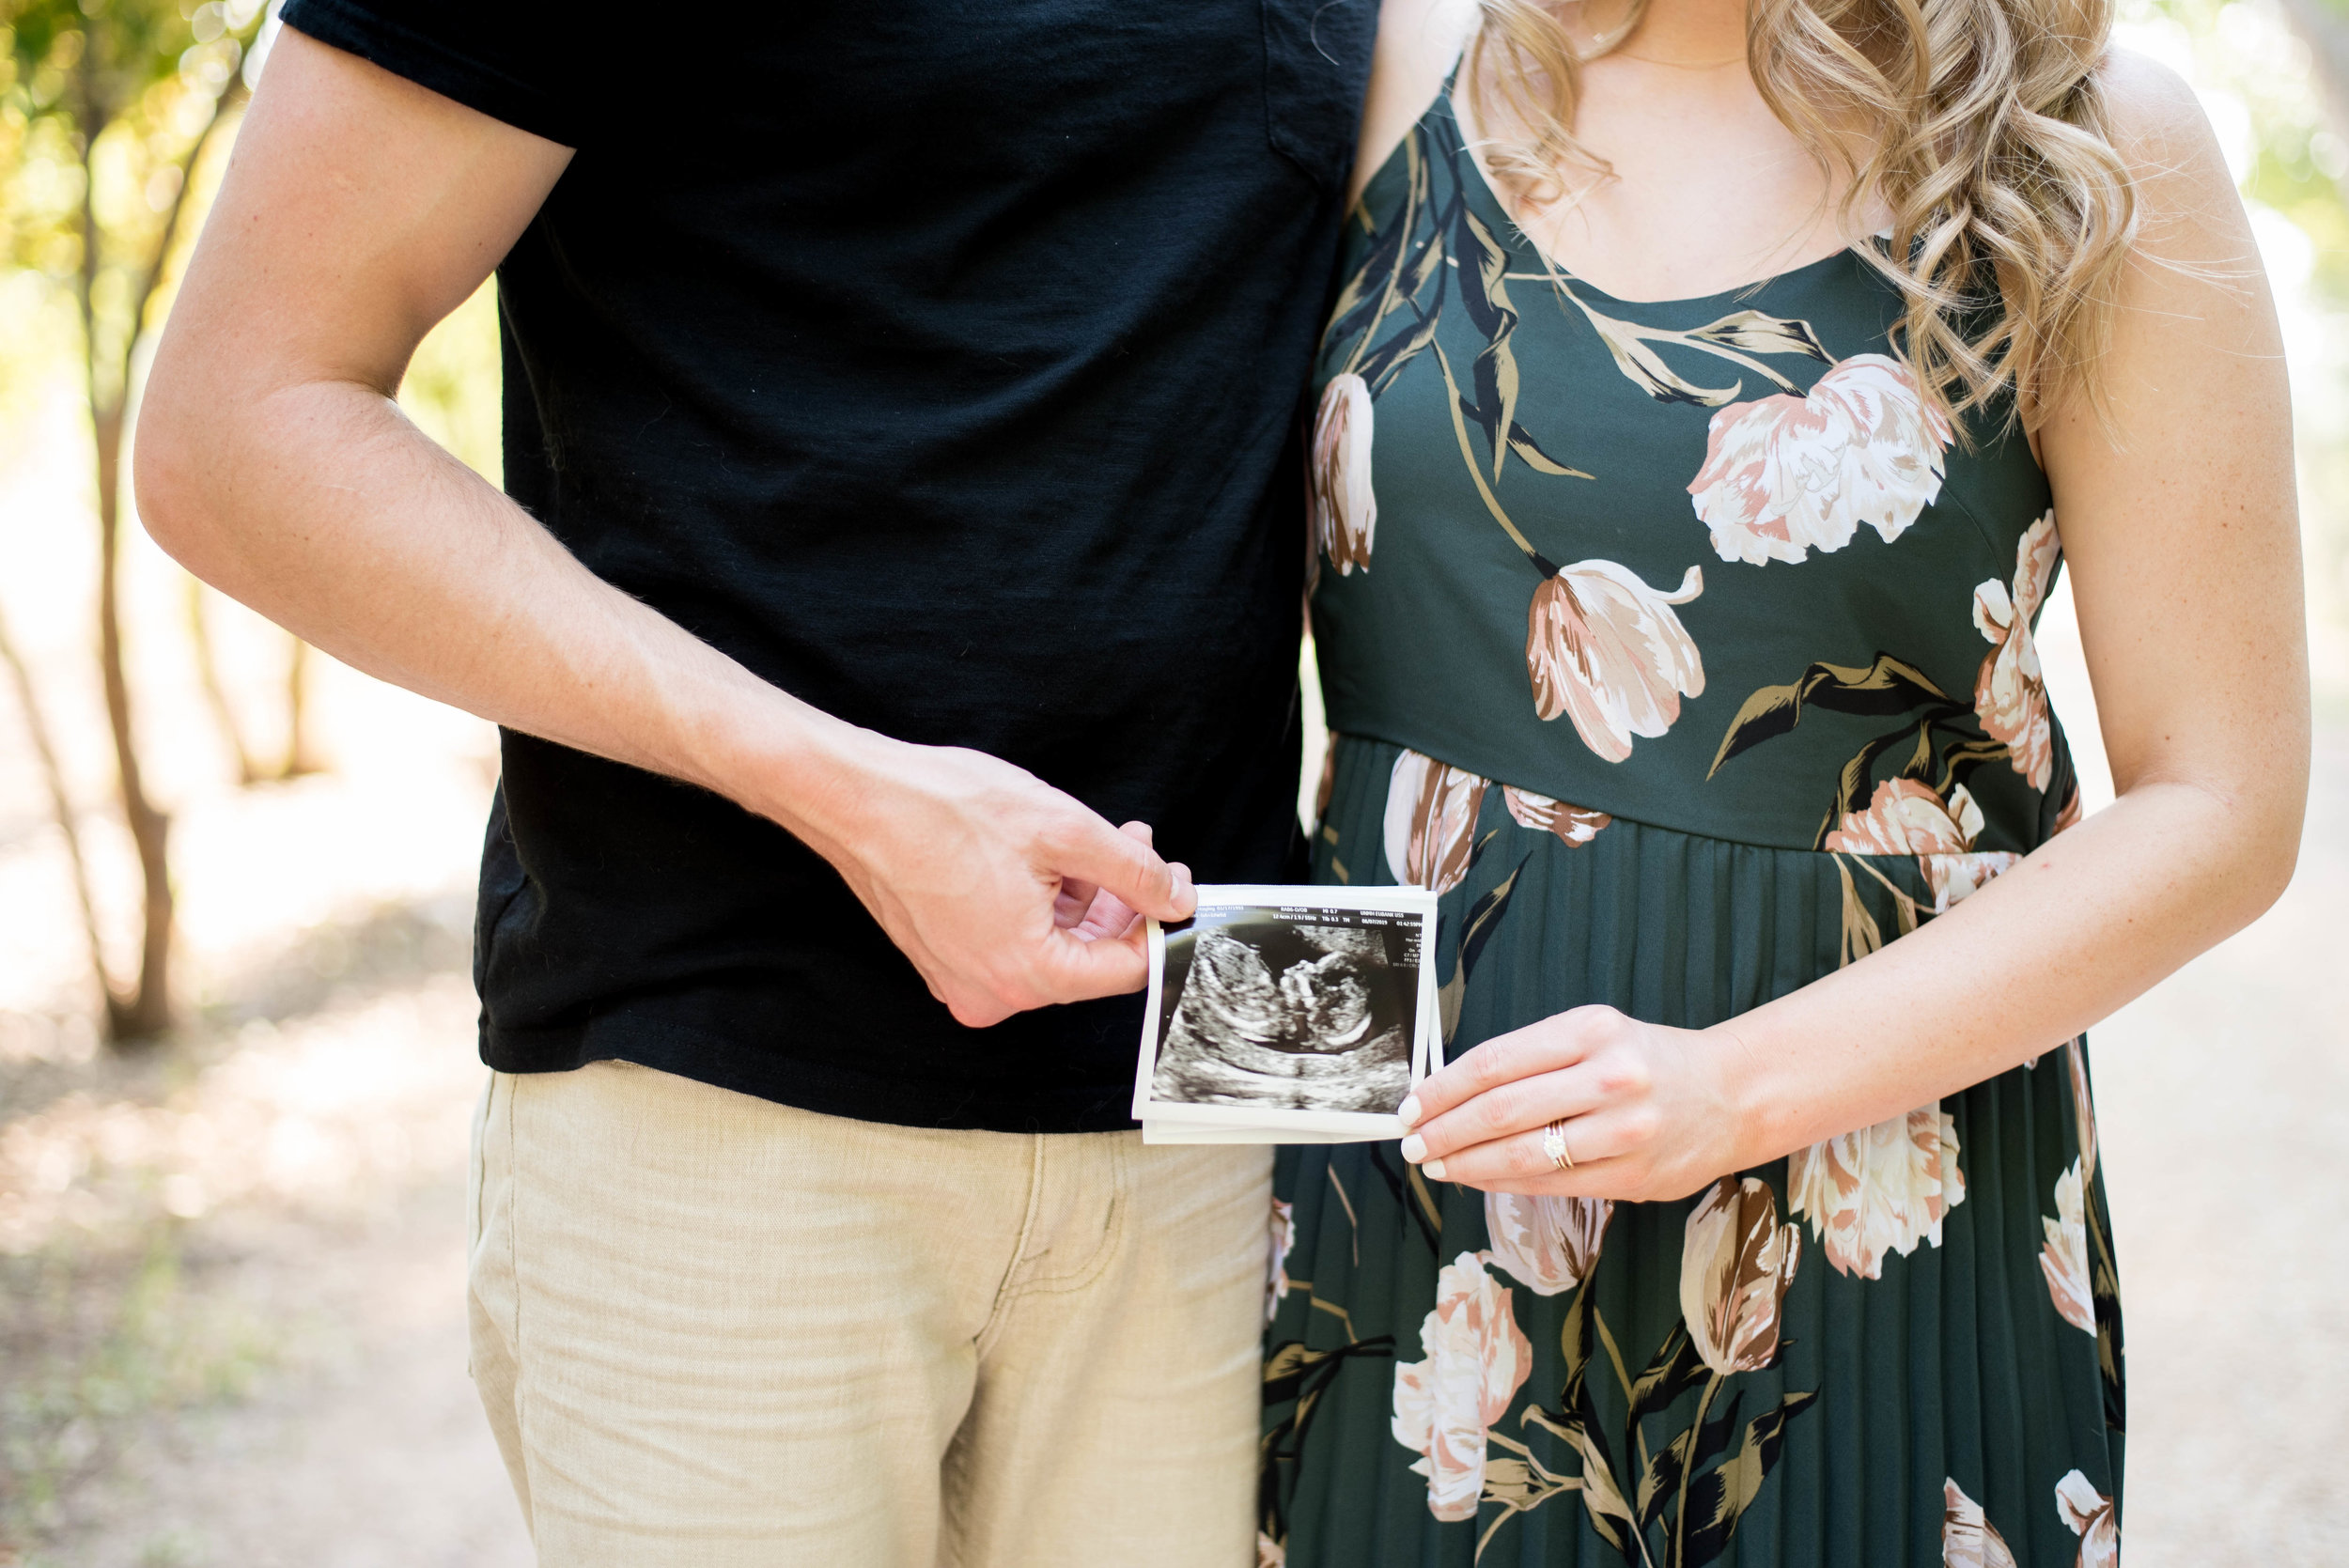 Ways to Announce Pregnancy on Social Media